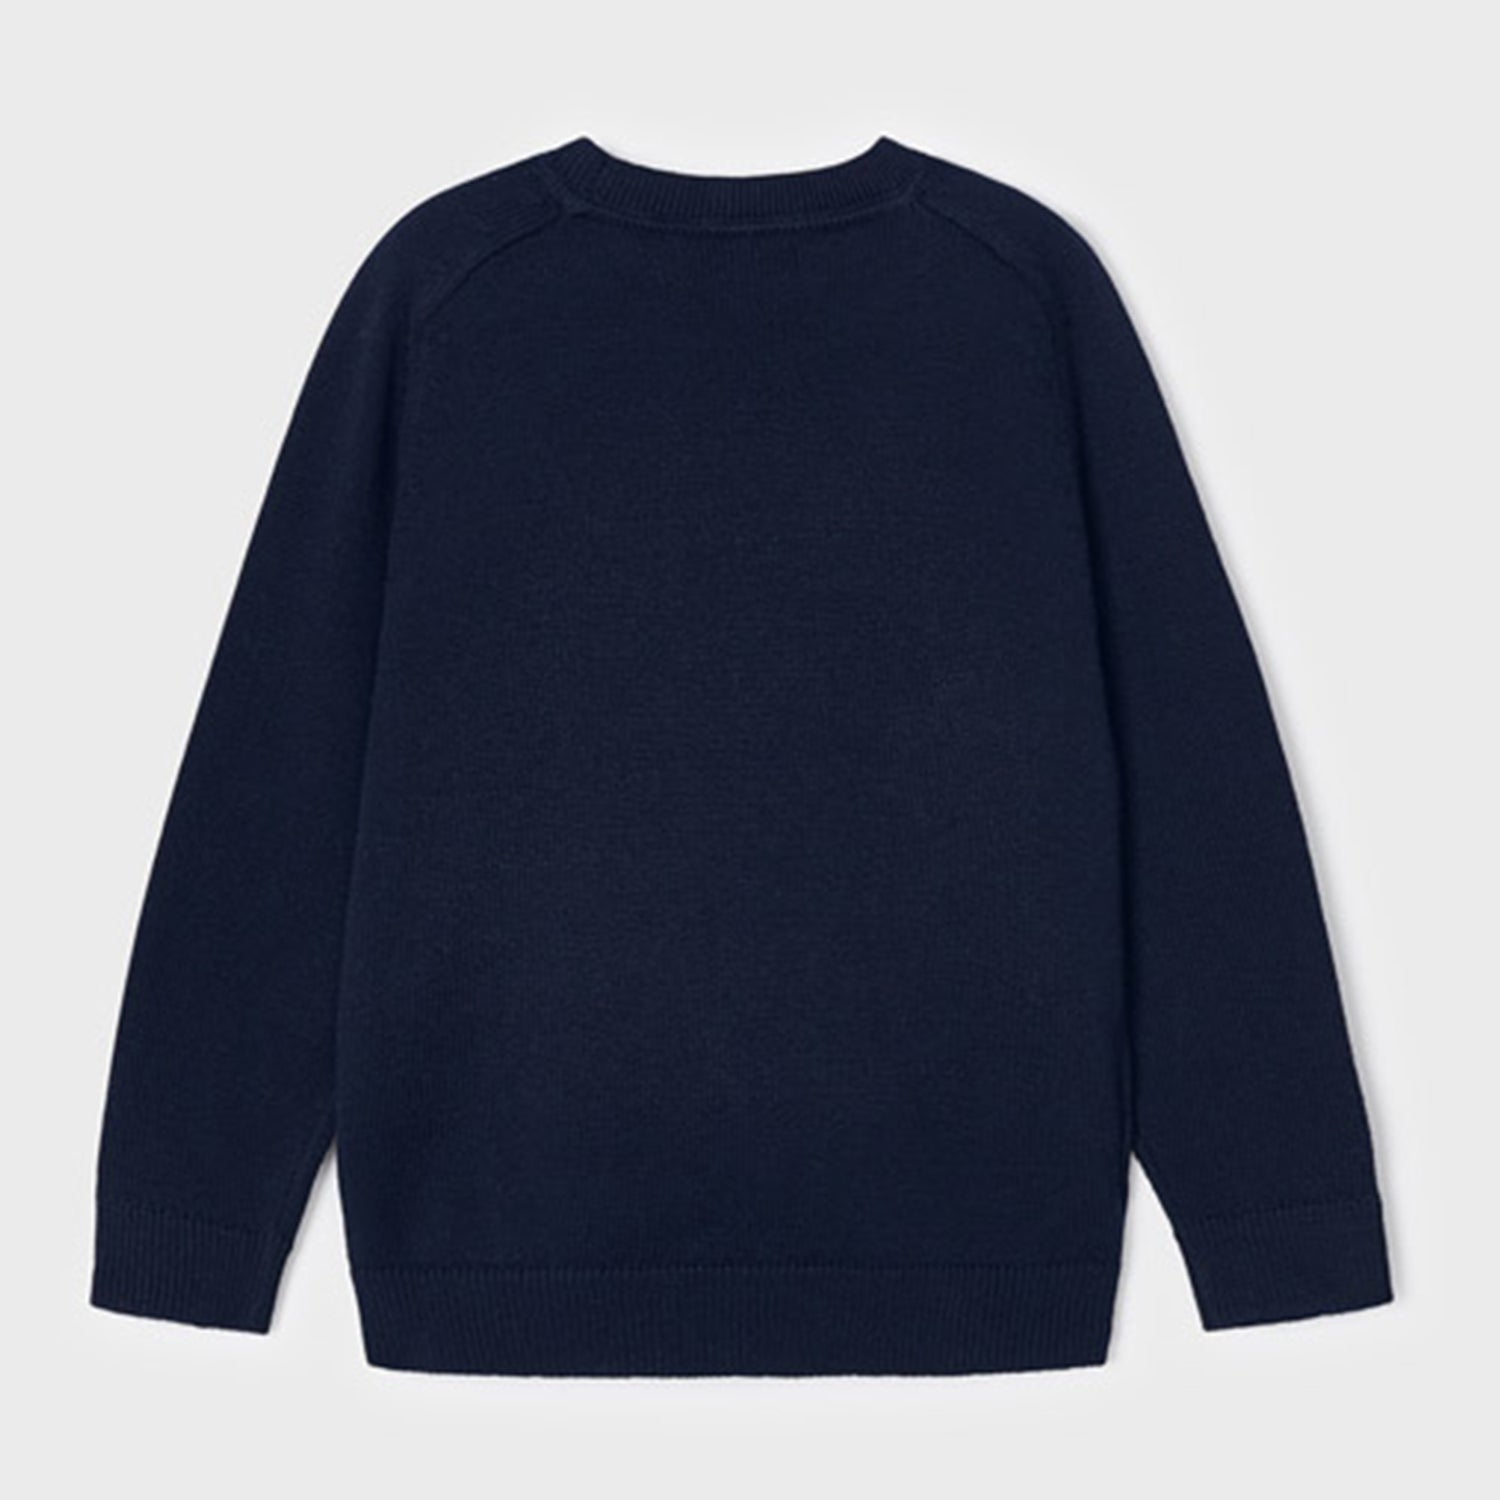 Navy Knitted Crew Neck Jumper